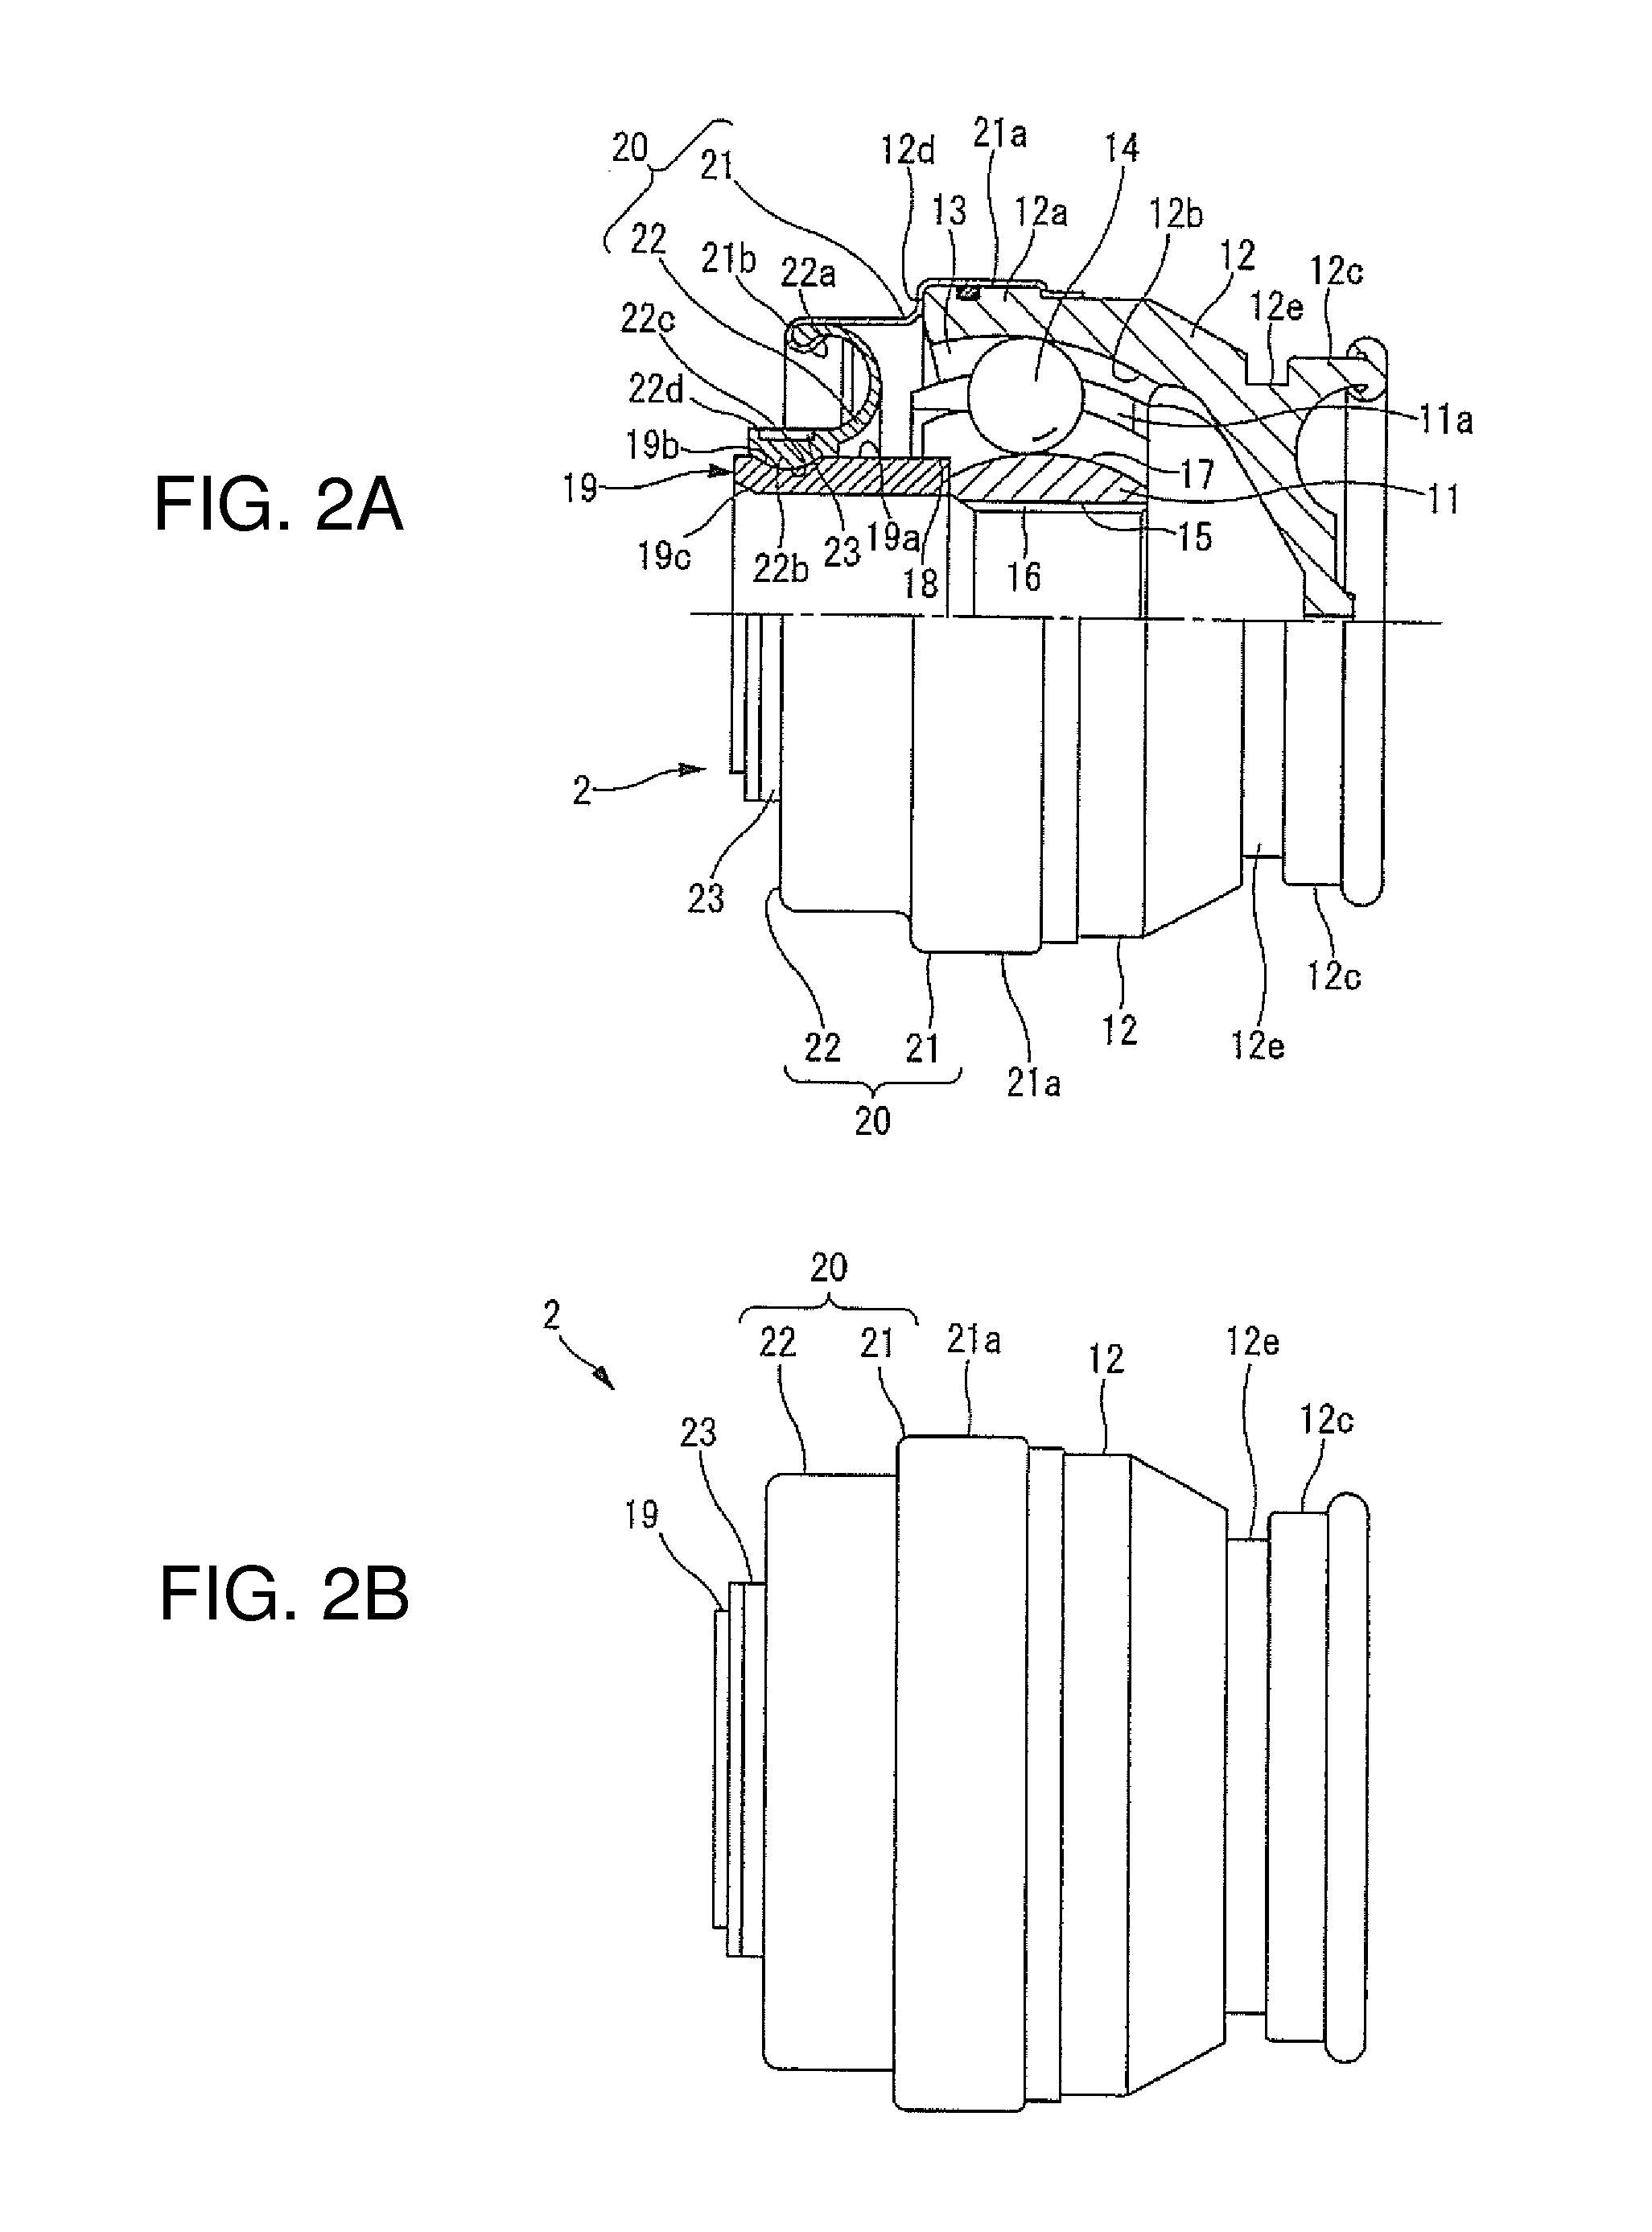 Propeller Shaft and Constant-Velocity Joint Used in Said Propeller Shaft